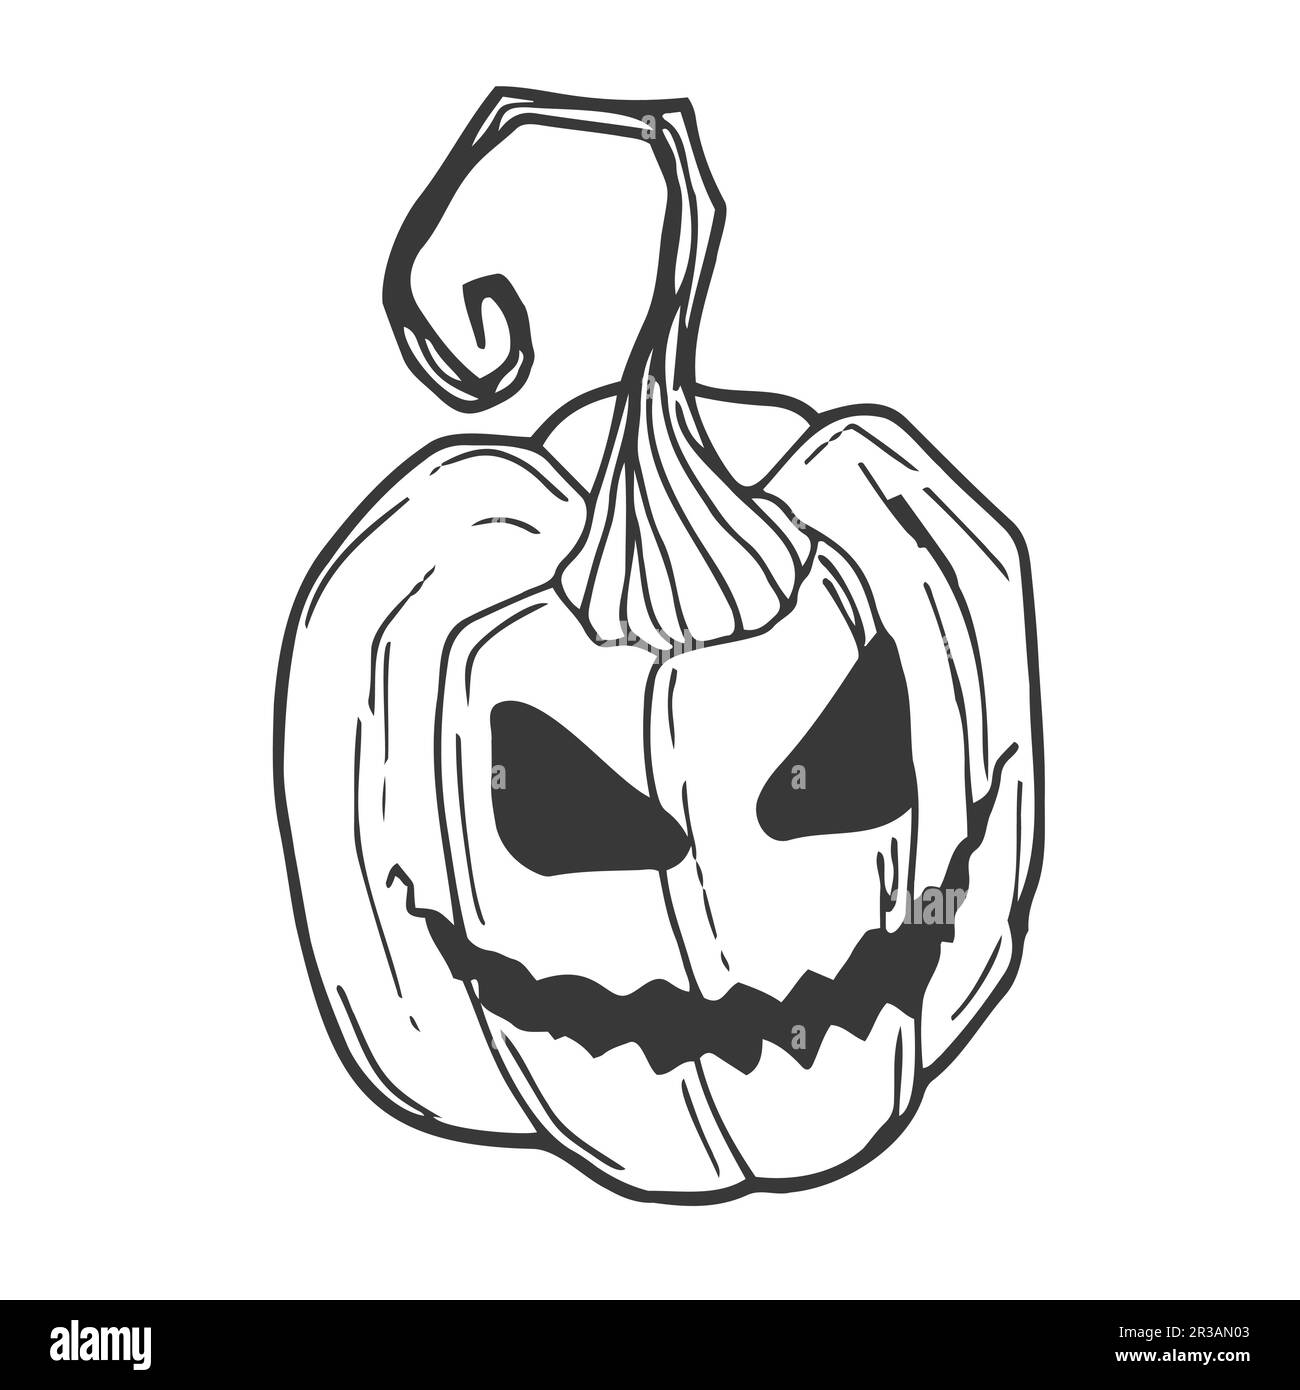 Halloween pumpkin. Vector concept in doodle and sketch style. Hand drawn illustration for printing on T-shirts, postcards. Stock Vector